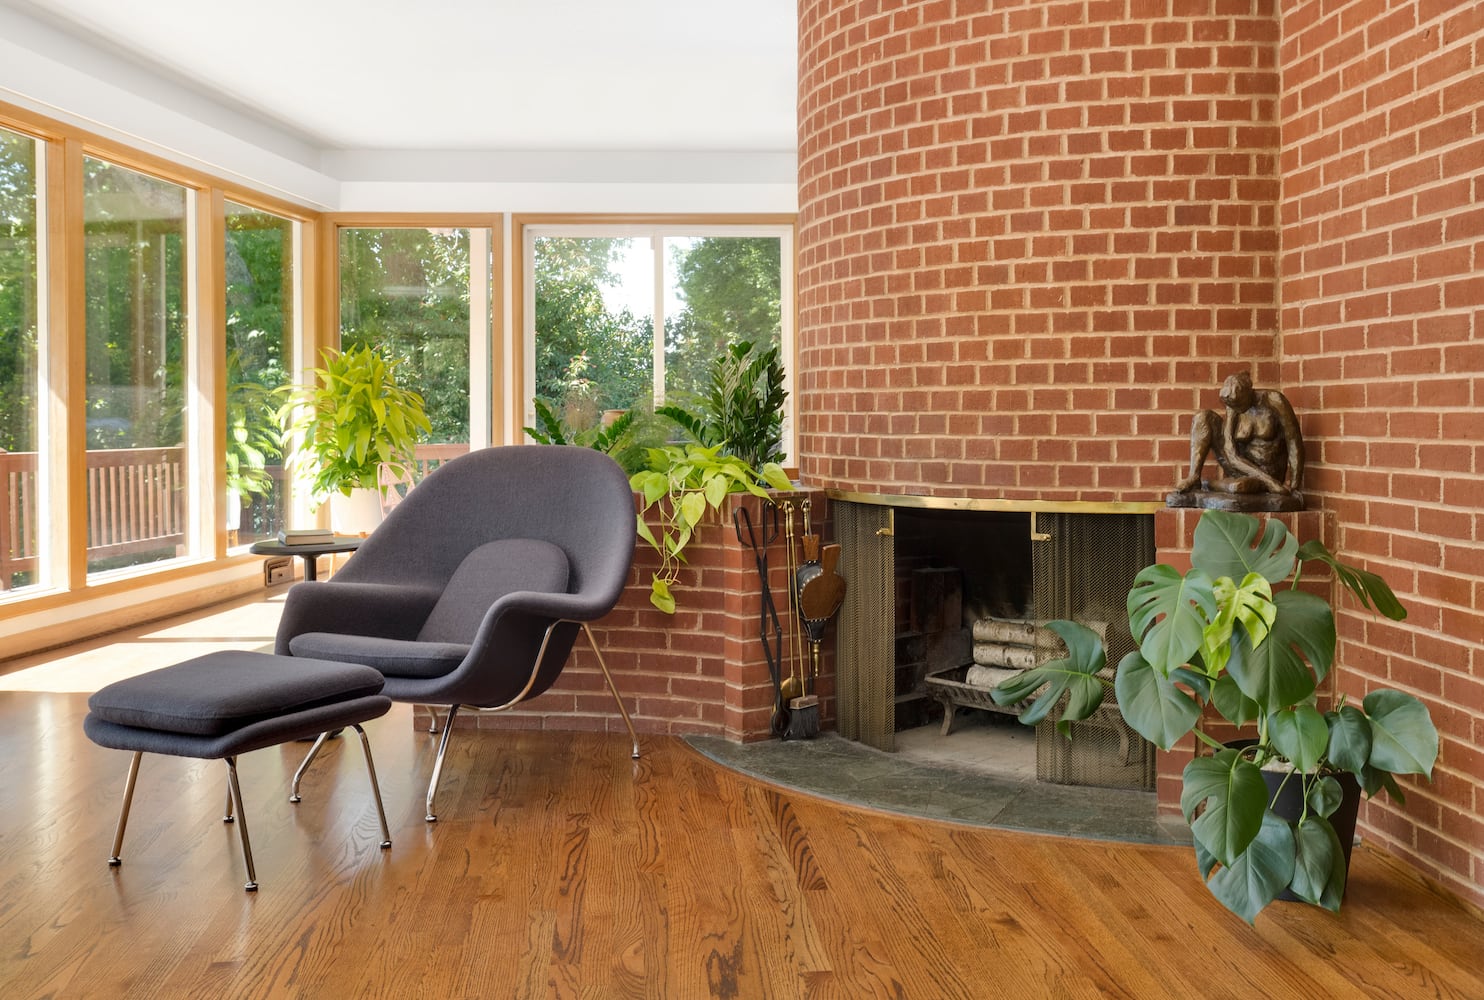 Brick circular fireplace with built-in planter, floor to ceiling windows, womb chair